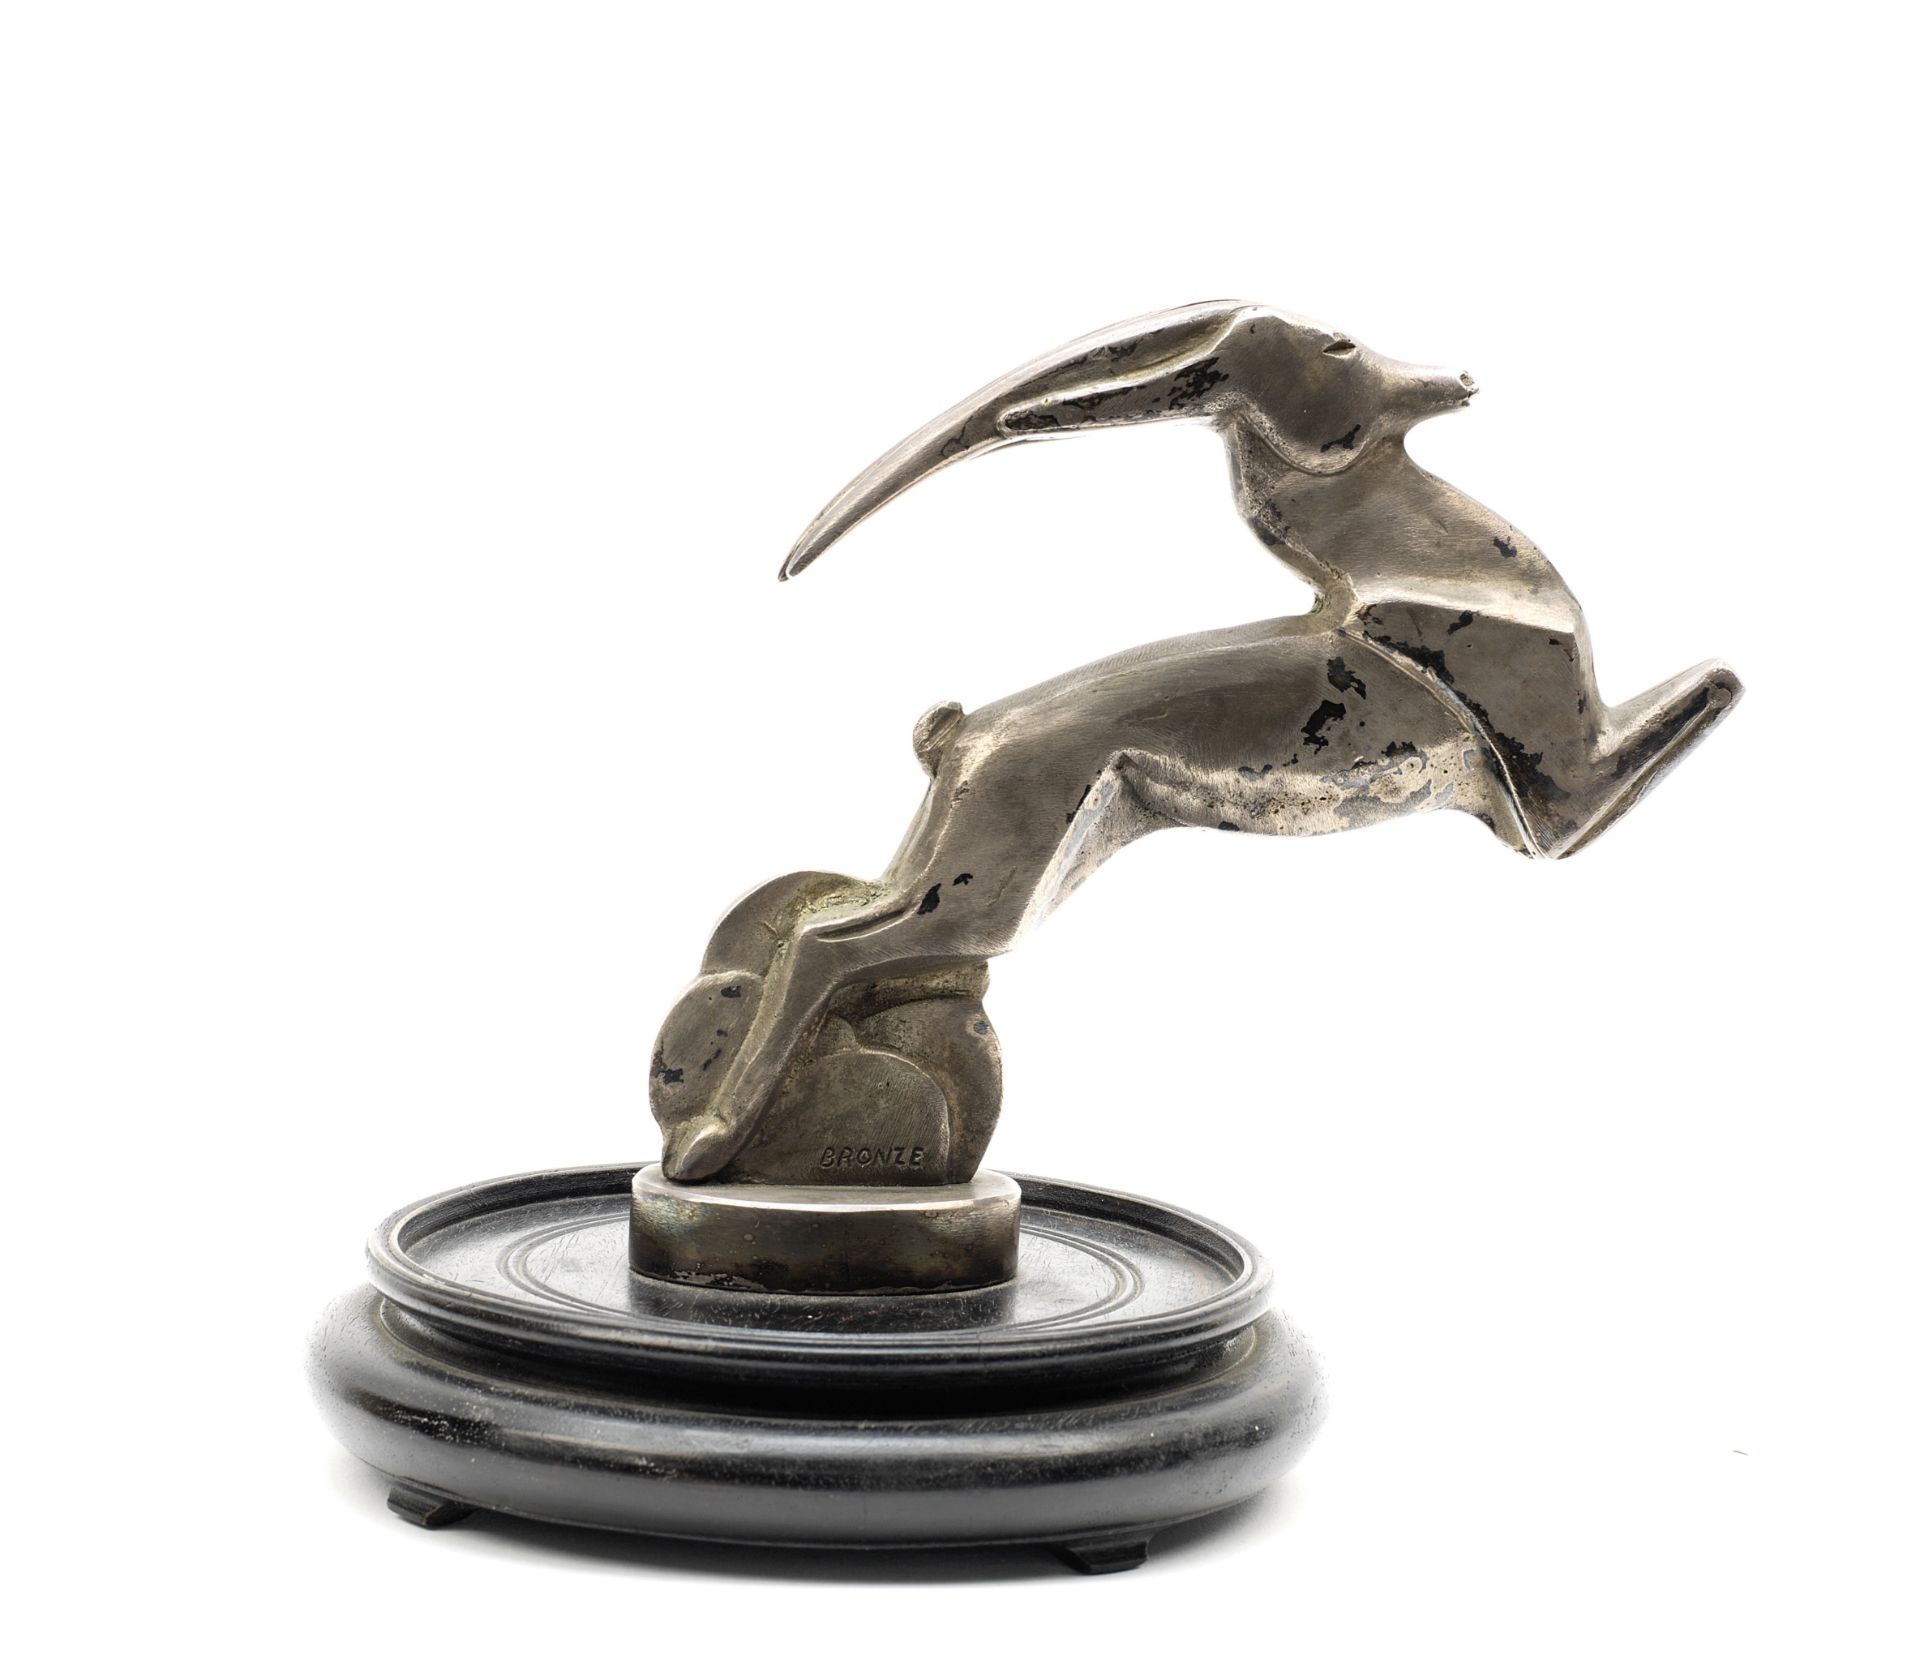 A 'Leaping Gazelle' mascot by Jacques Cartier, French, 1920s,